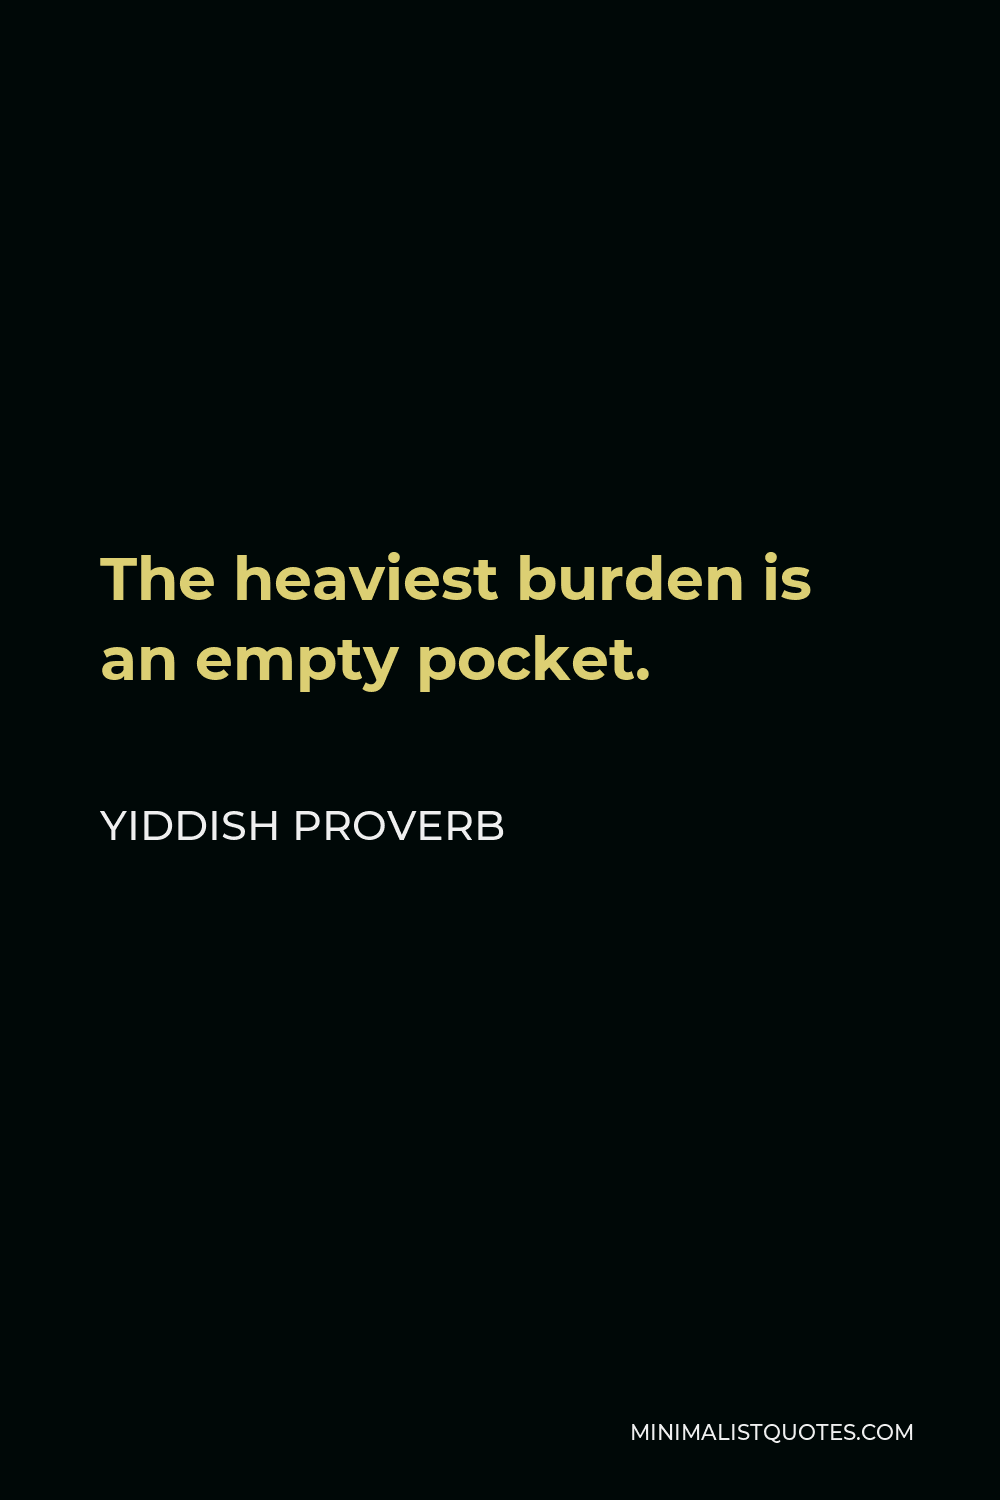 Yiddish Proverb Quote - The heaviest burden is an empty pocket.